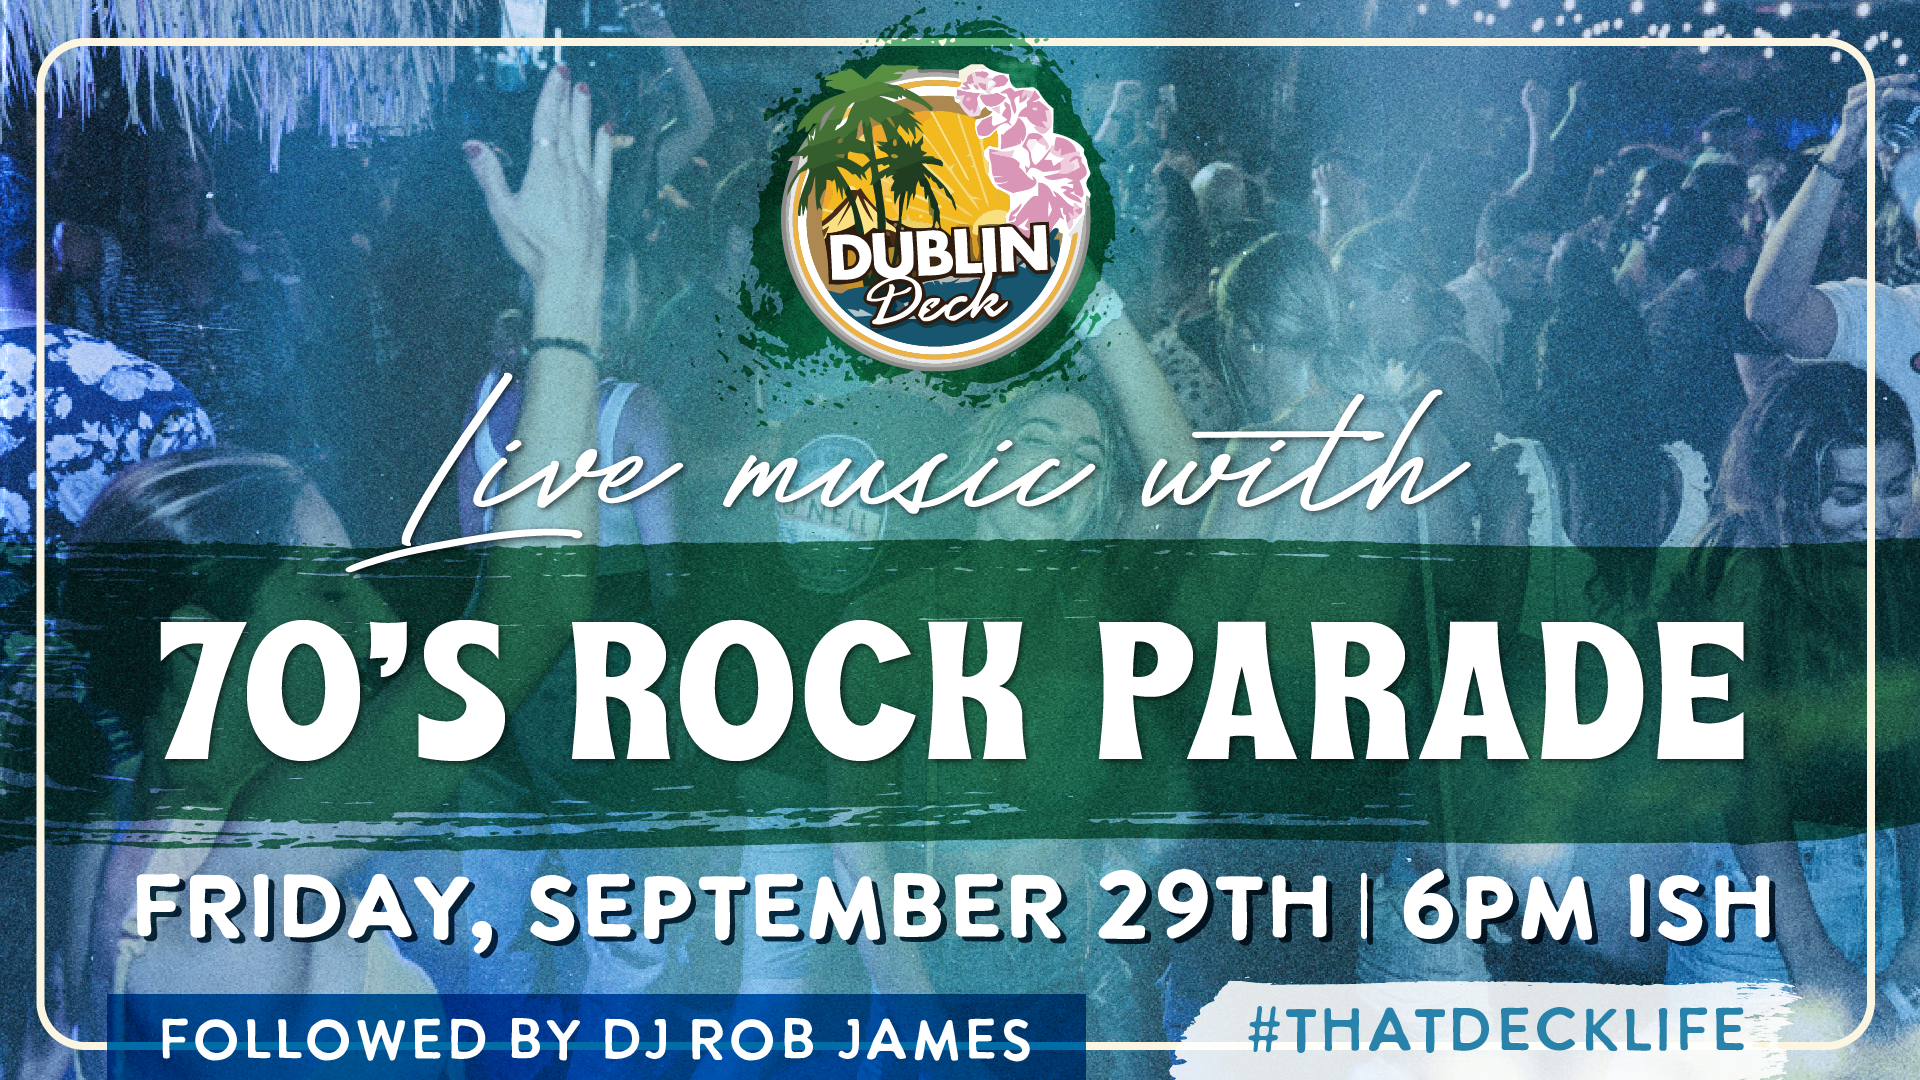 Enjoy the sounds of 70's Rock Parade at Dublin Deck! Music begins at 6PM-ish